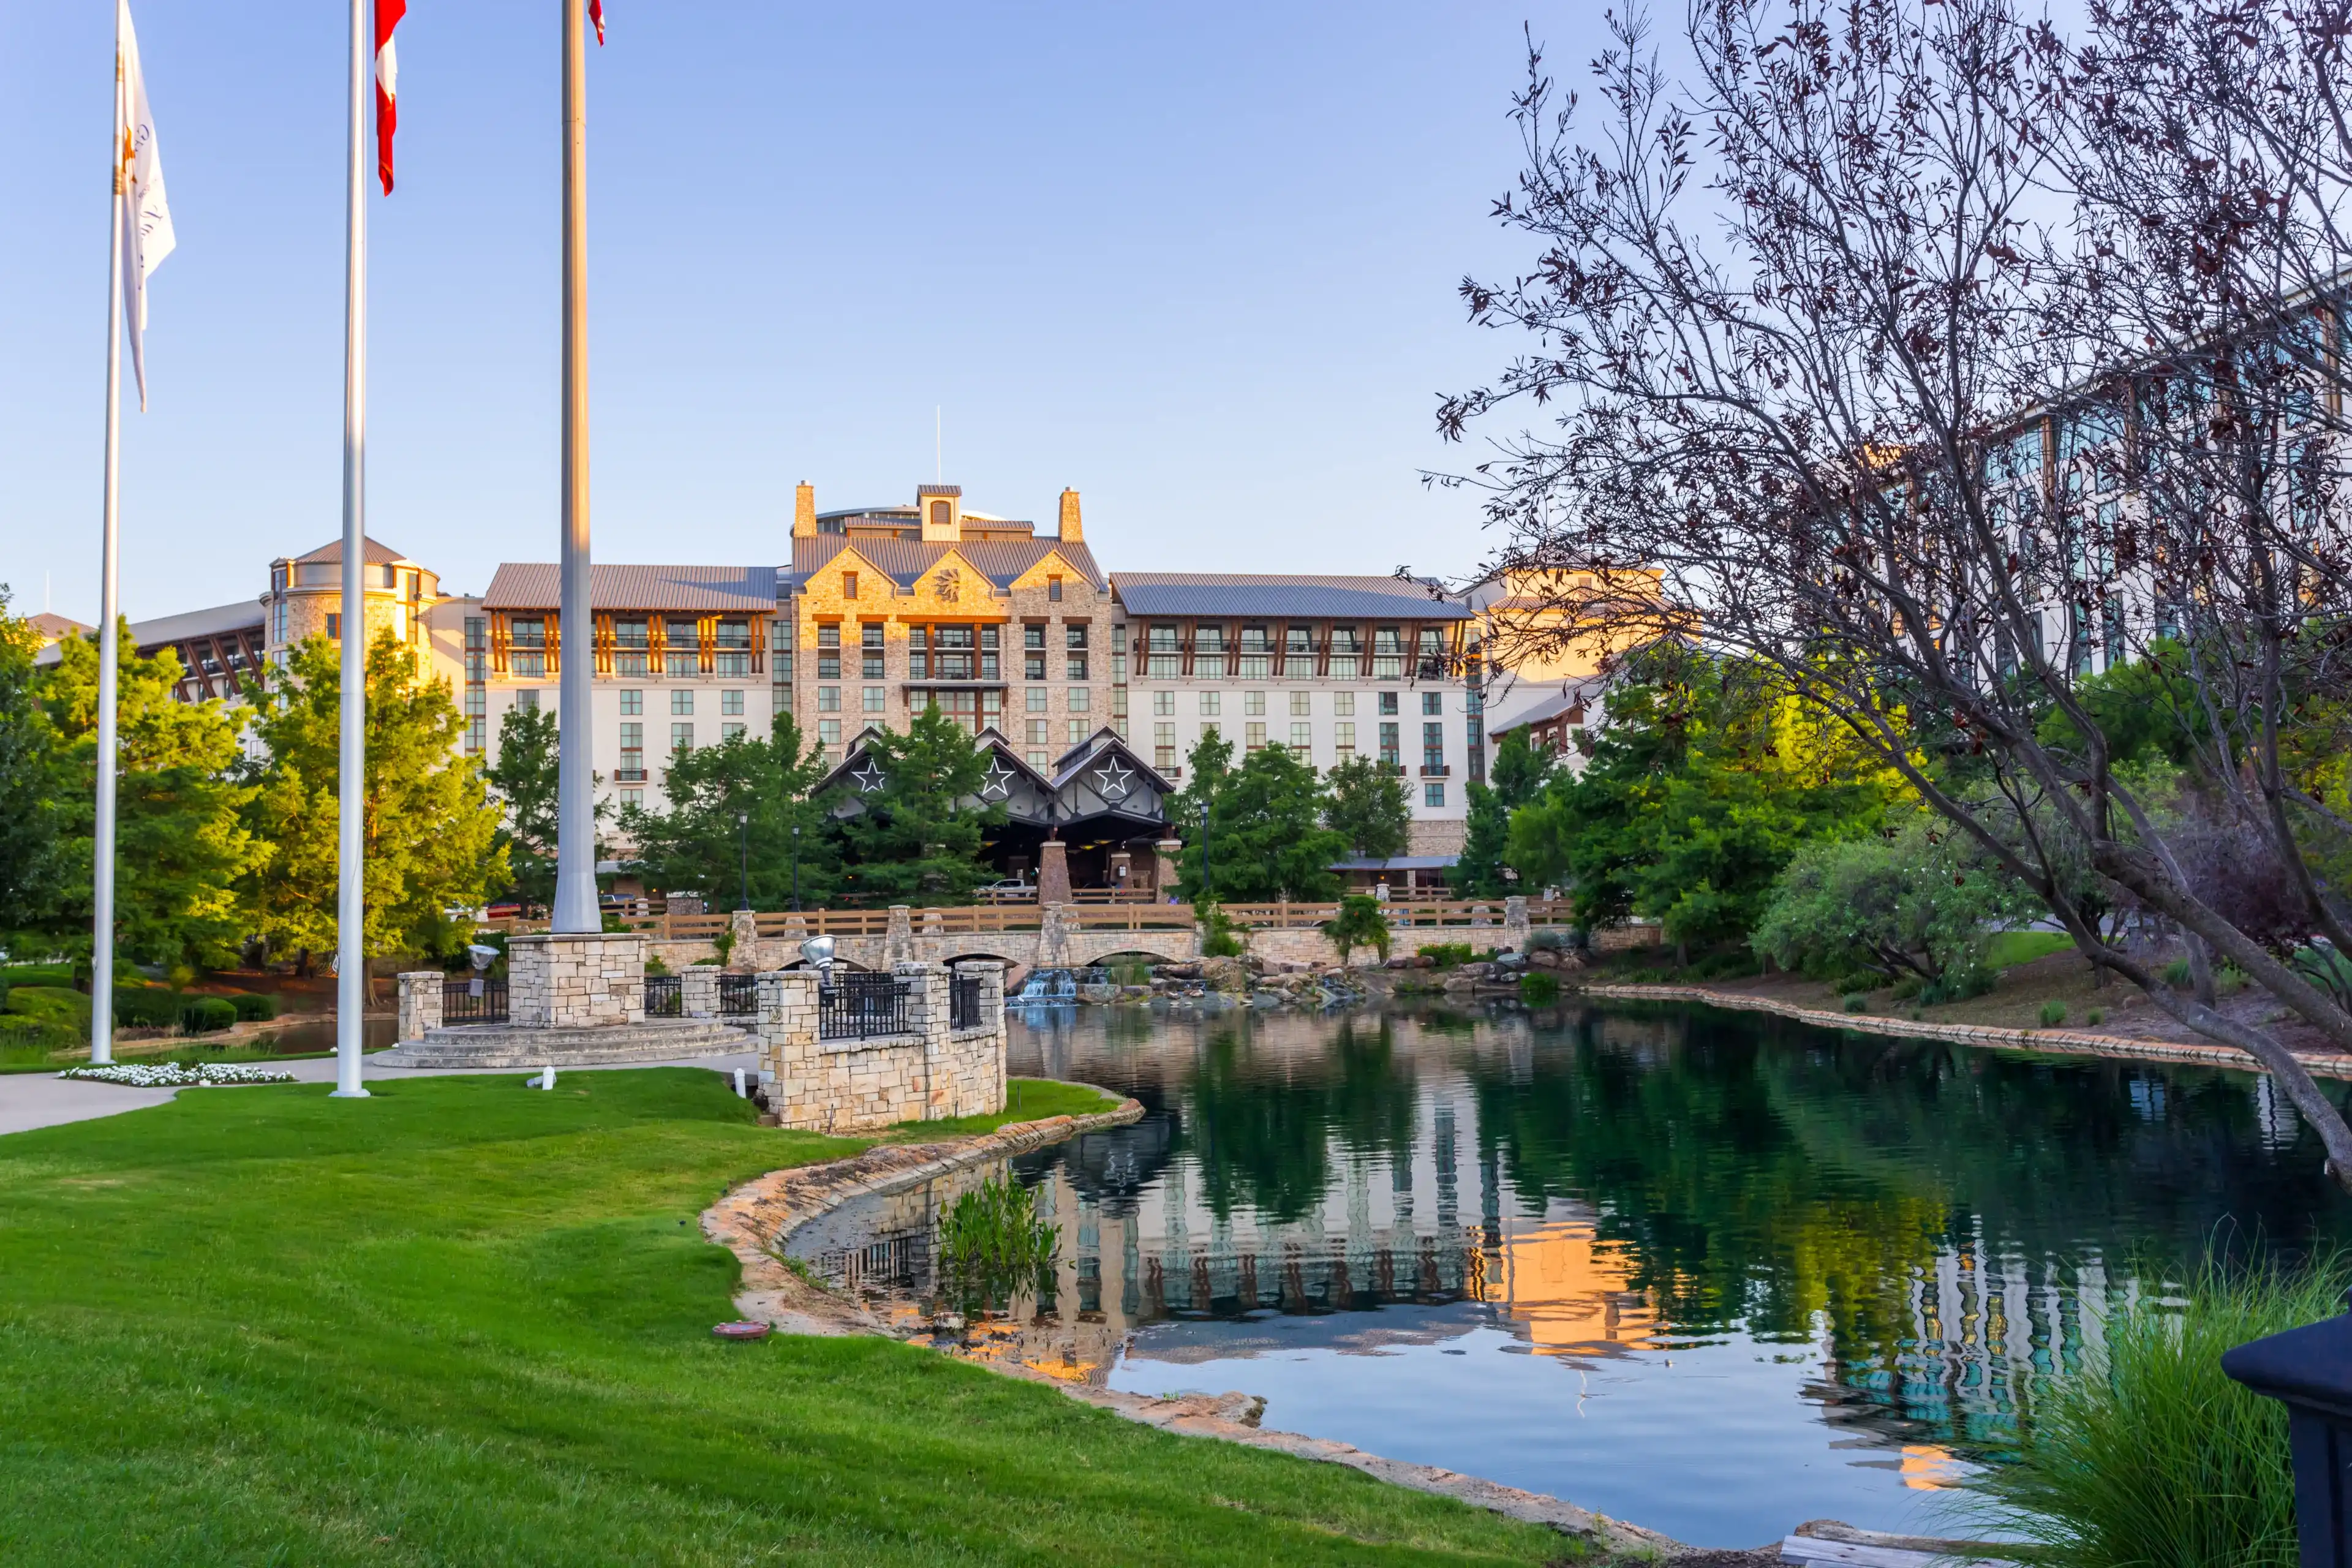 Best Grapevine hotels. Cheap hotels in Grapevine, Texas, United States